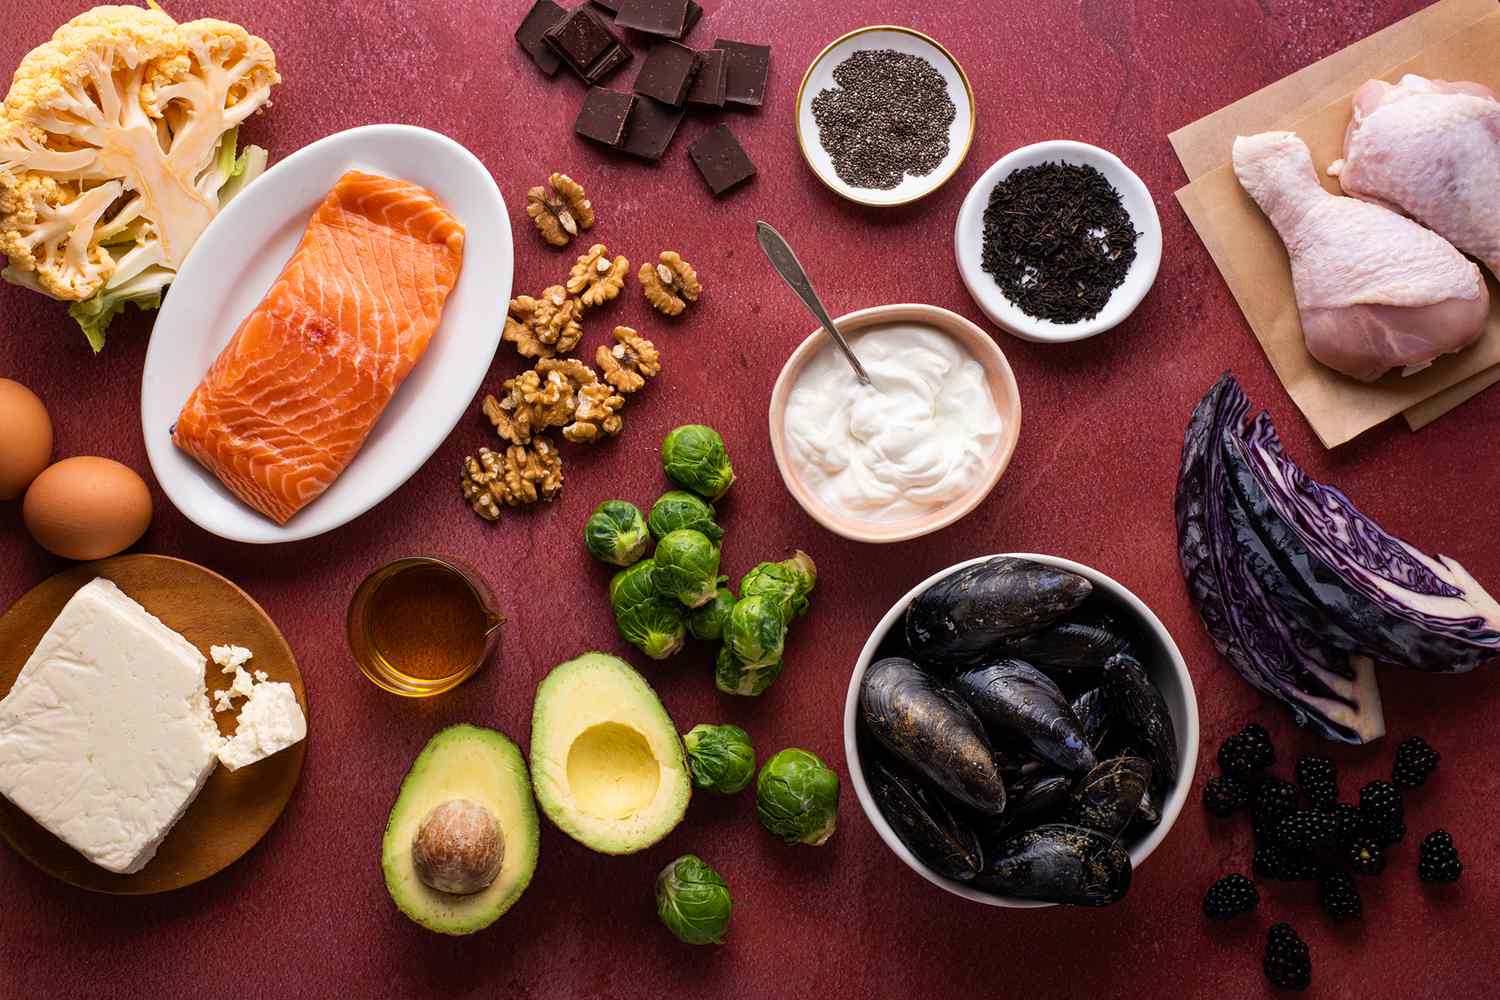 a still life of Keto friendly foods such as fish, vegetables, nuts, and more